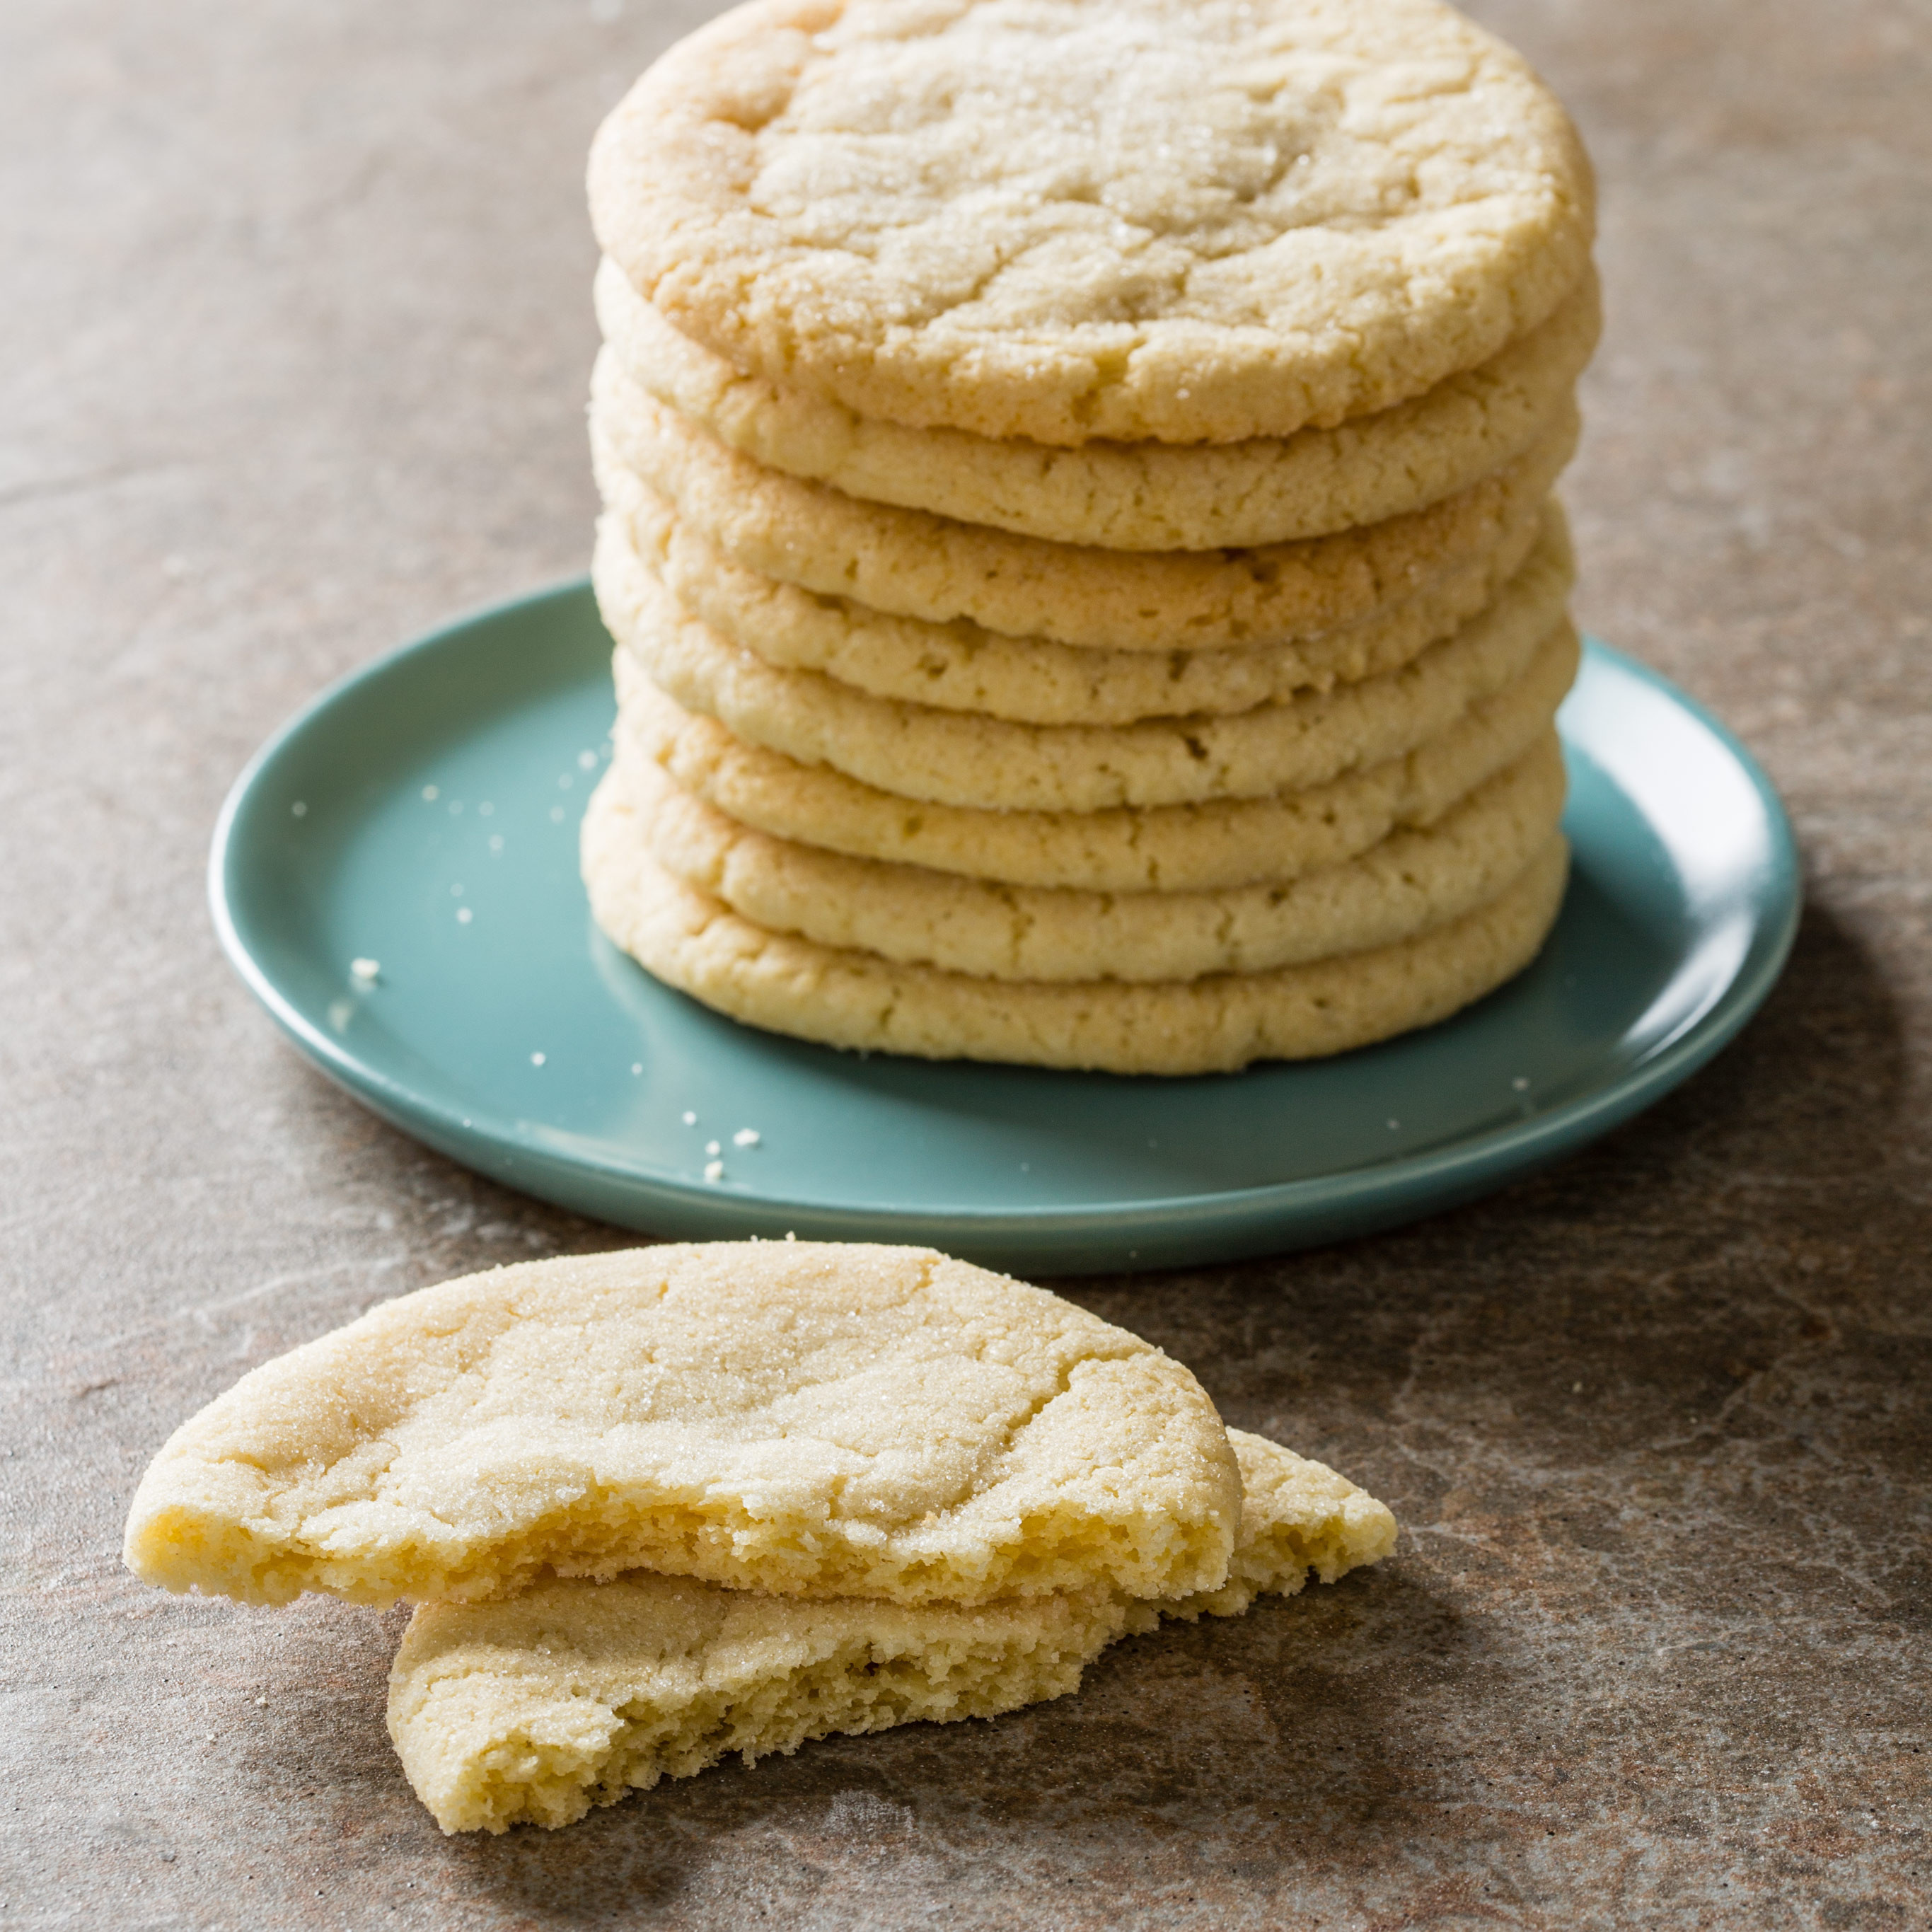 The Best Americas Test Kitchen Christmas Cookies - Best Recipes Ever